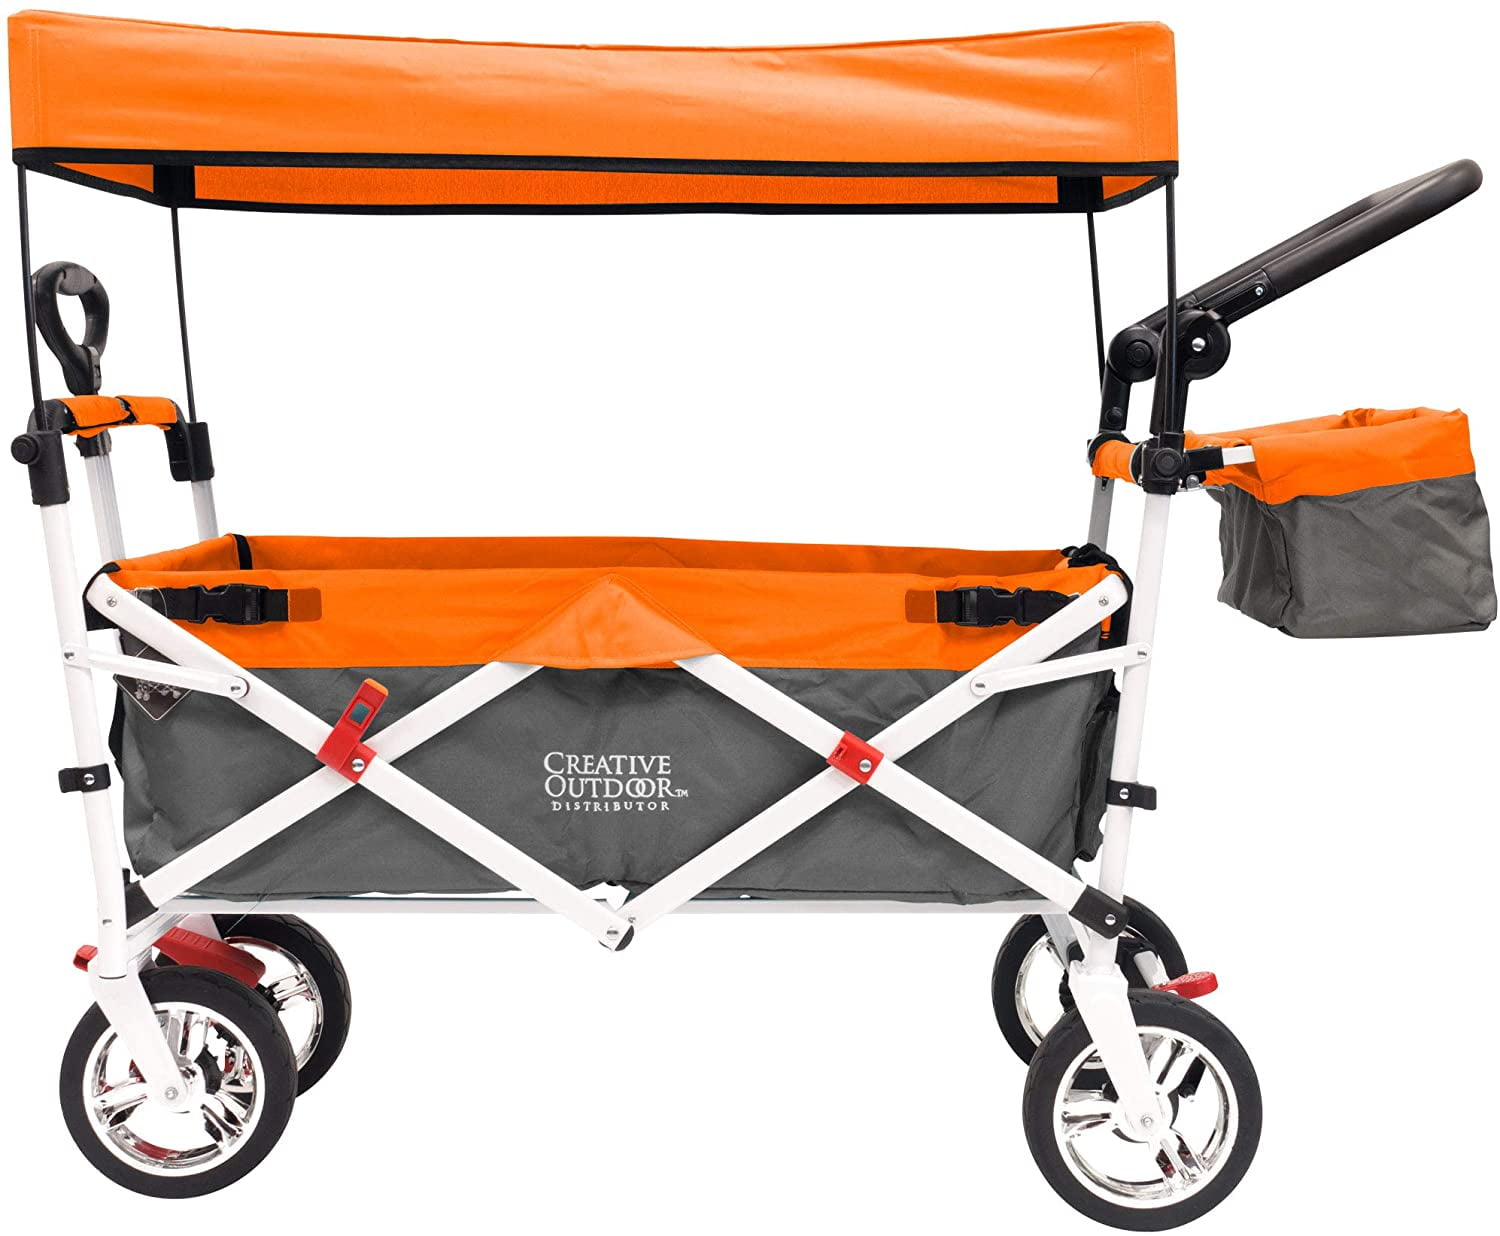 WonderFold Pull and Push Collapsible Folding Utility Wagon with All-Terrain Tire 